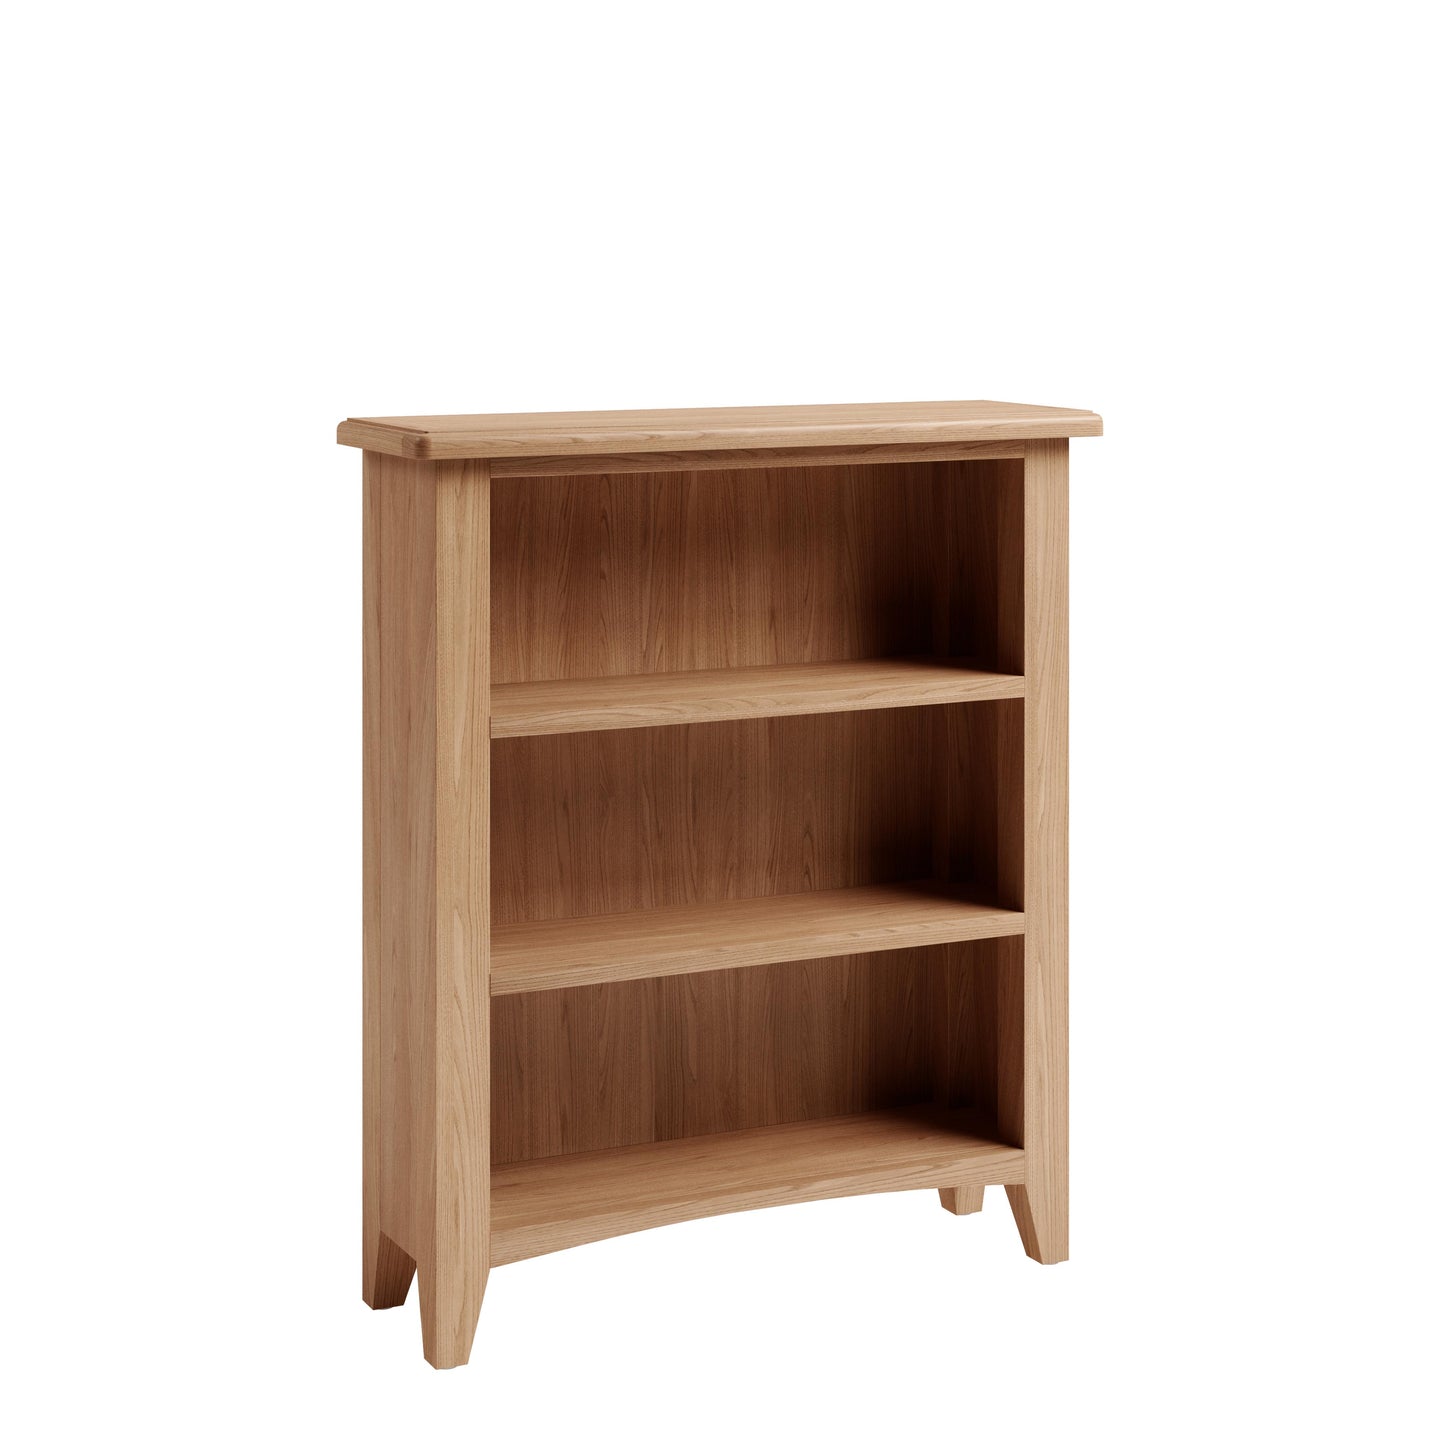 Manor Collection Woodstock Small Wide Bookcase